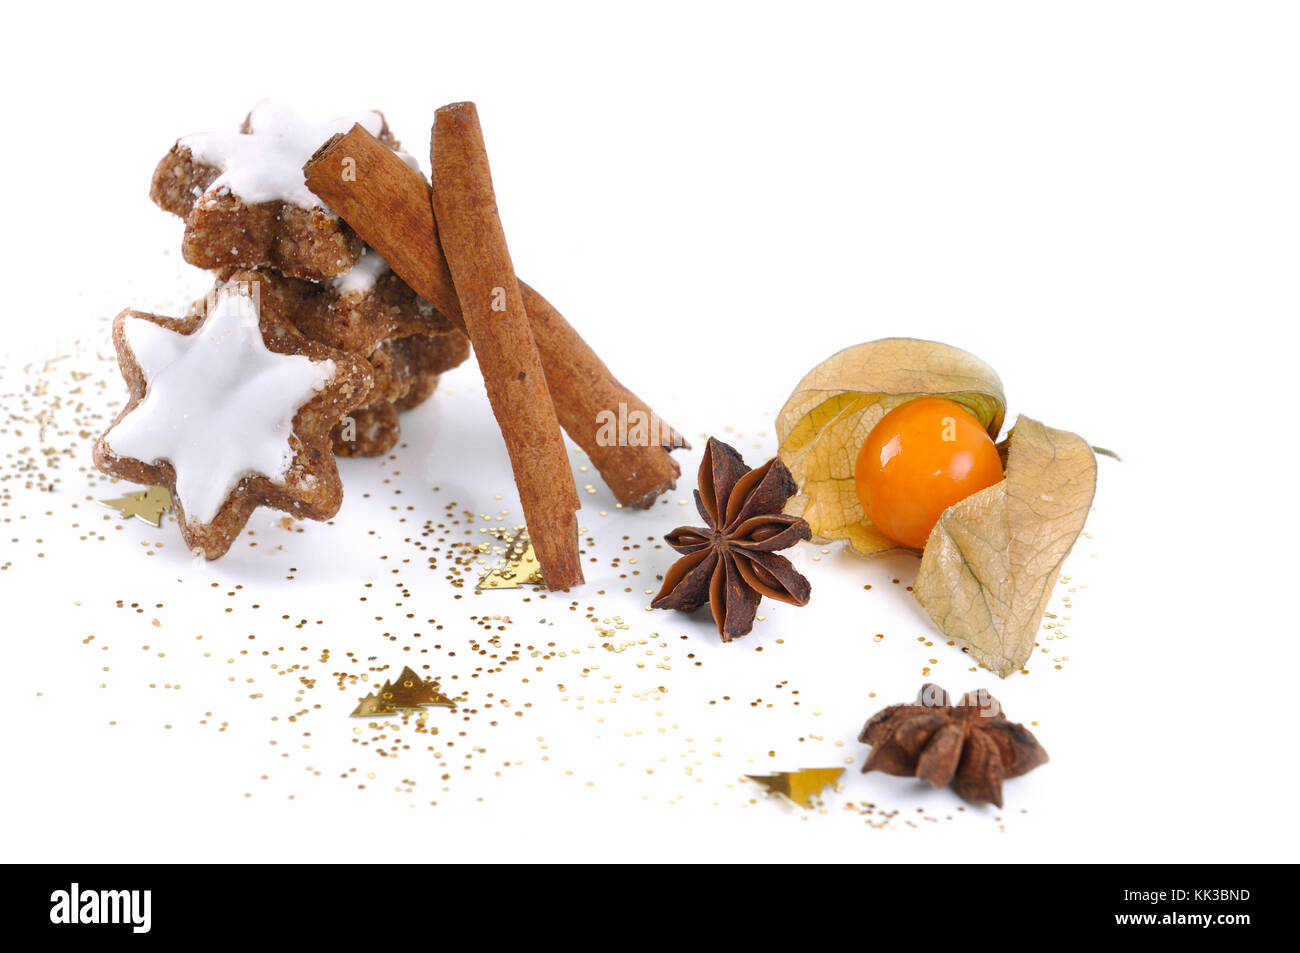 Biscuit in the cinnamon and the star anise with physalis on white background Stock Photo